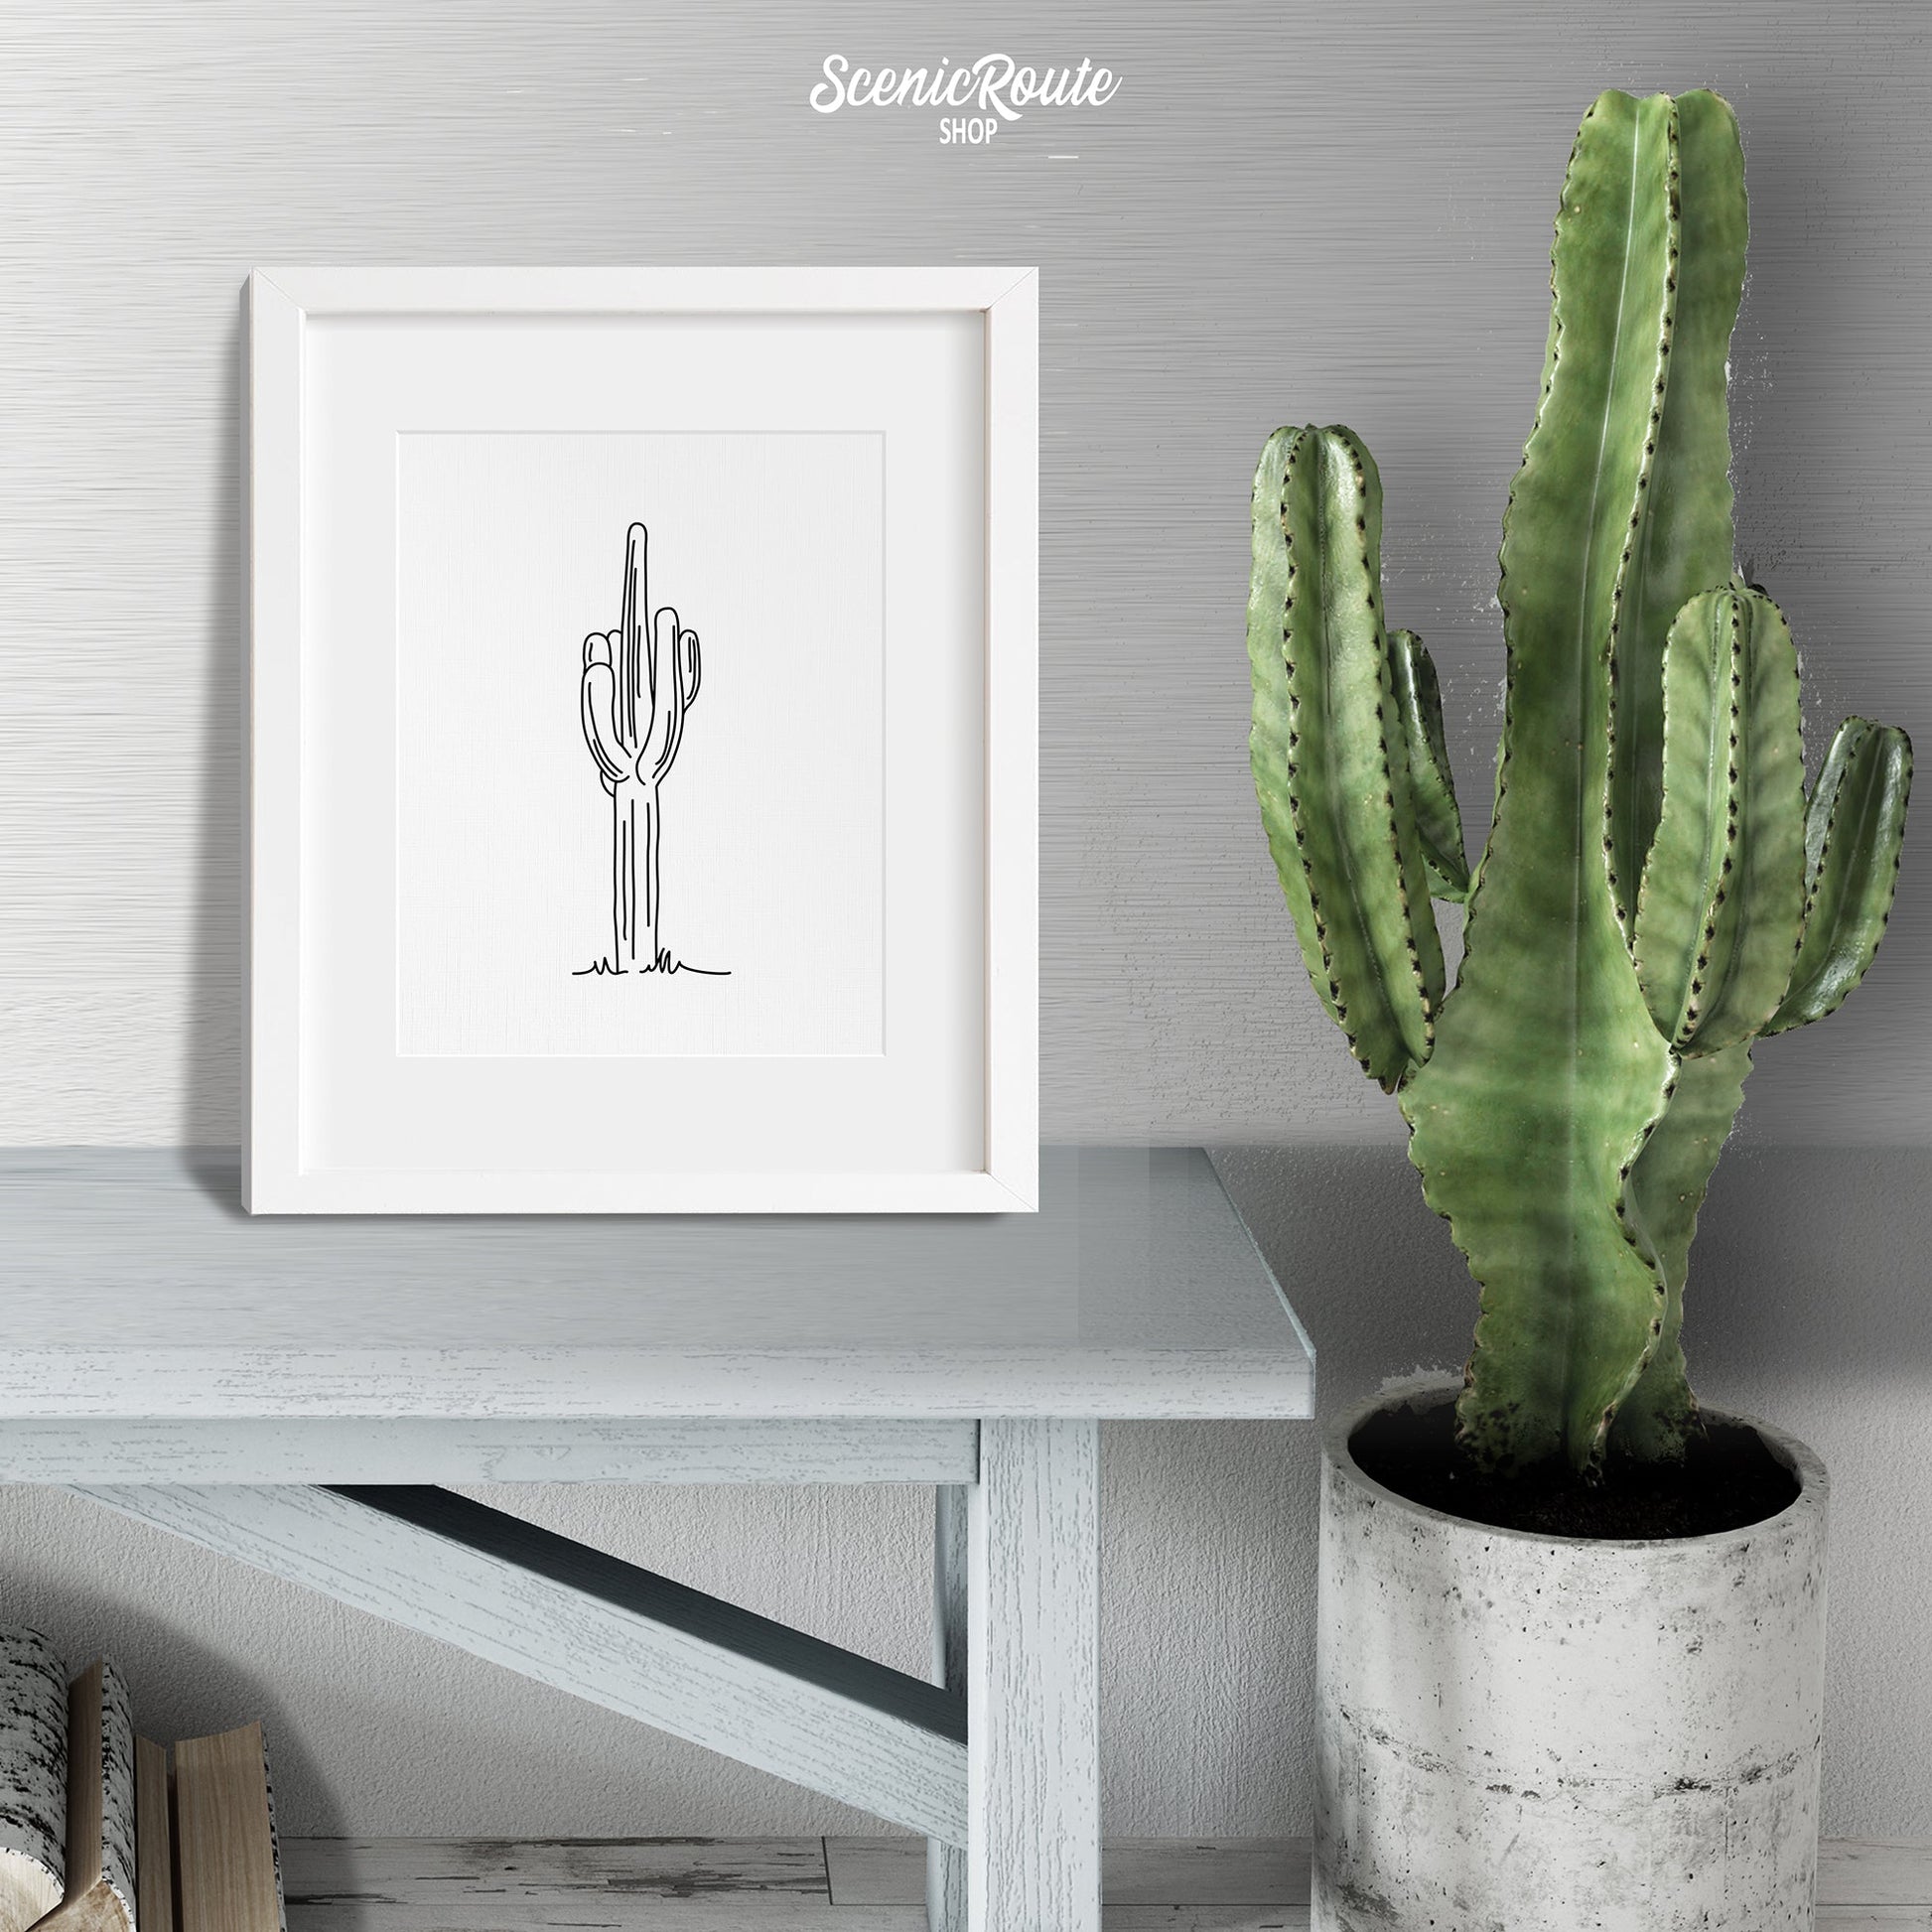 A framed line art drawing of a Saguaro Cactus sitting on a bench next to a potted cactus